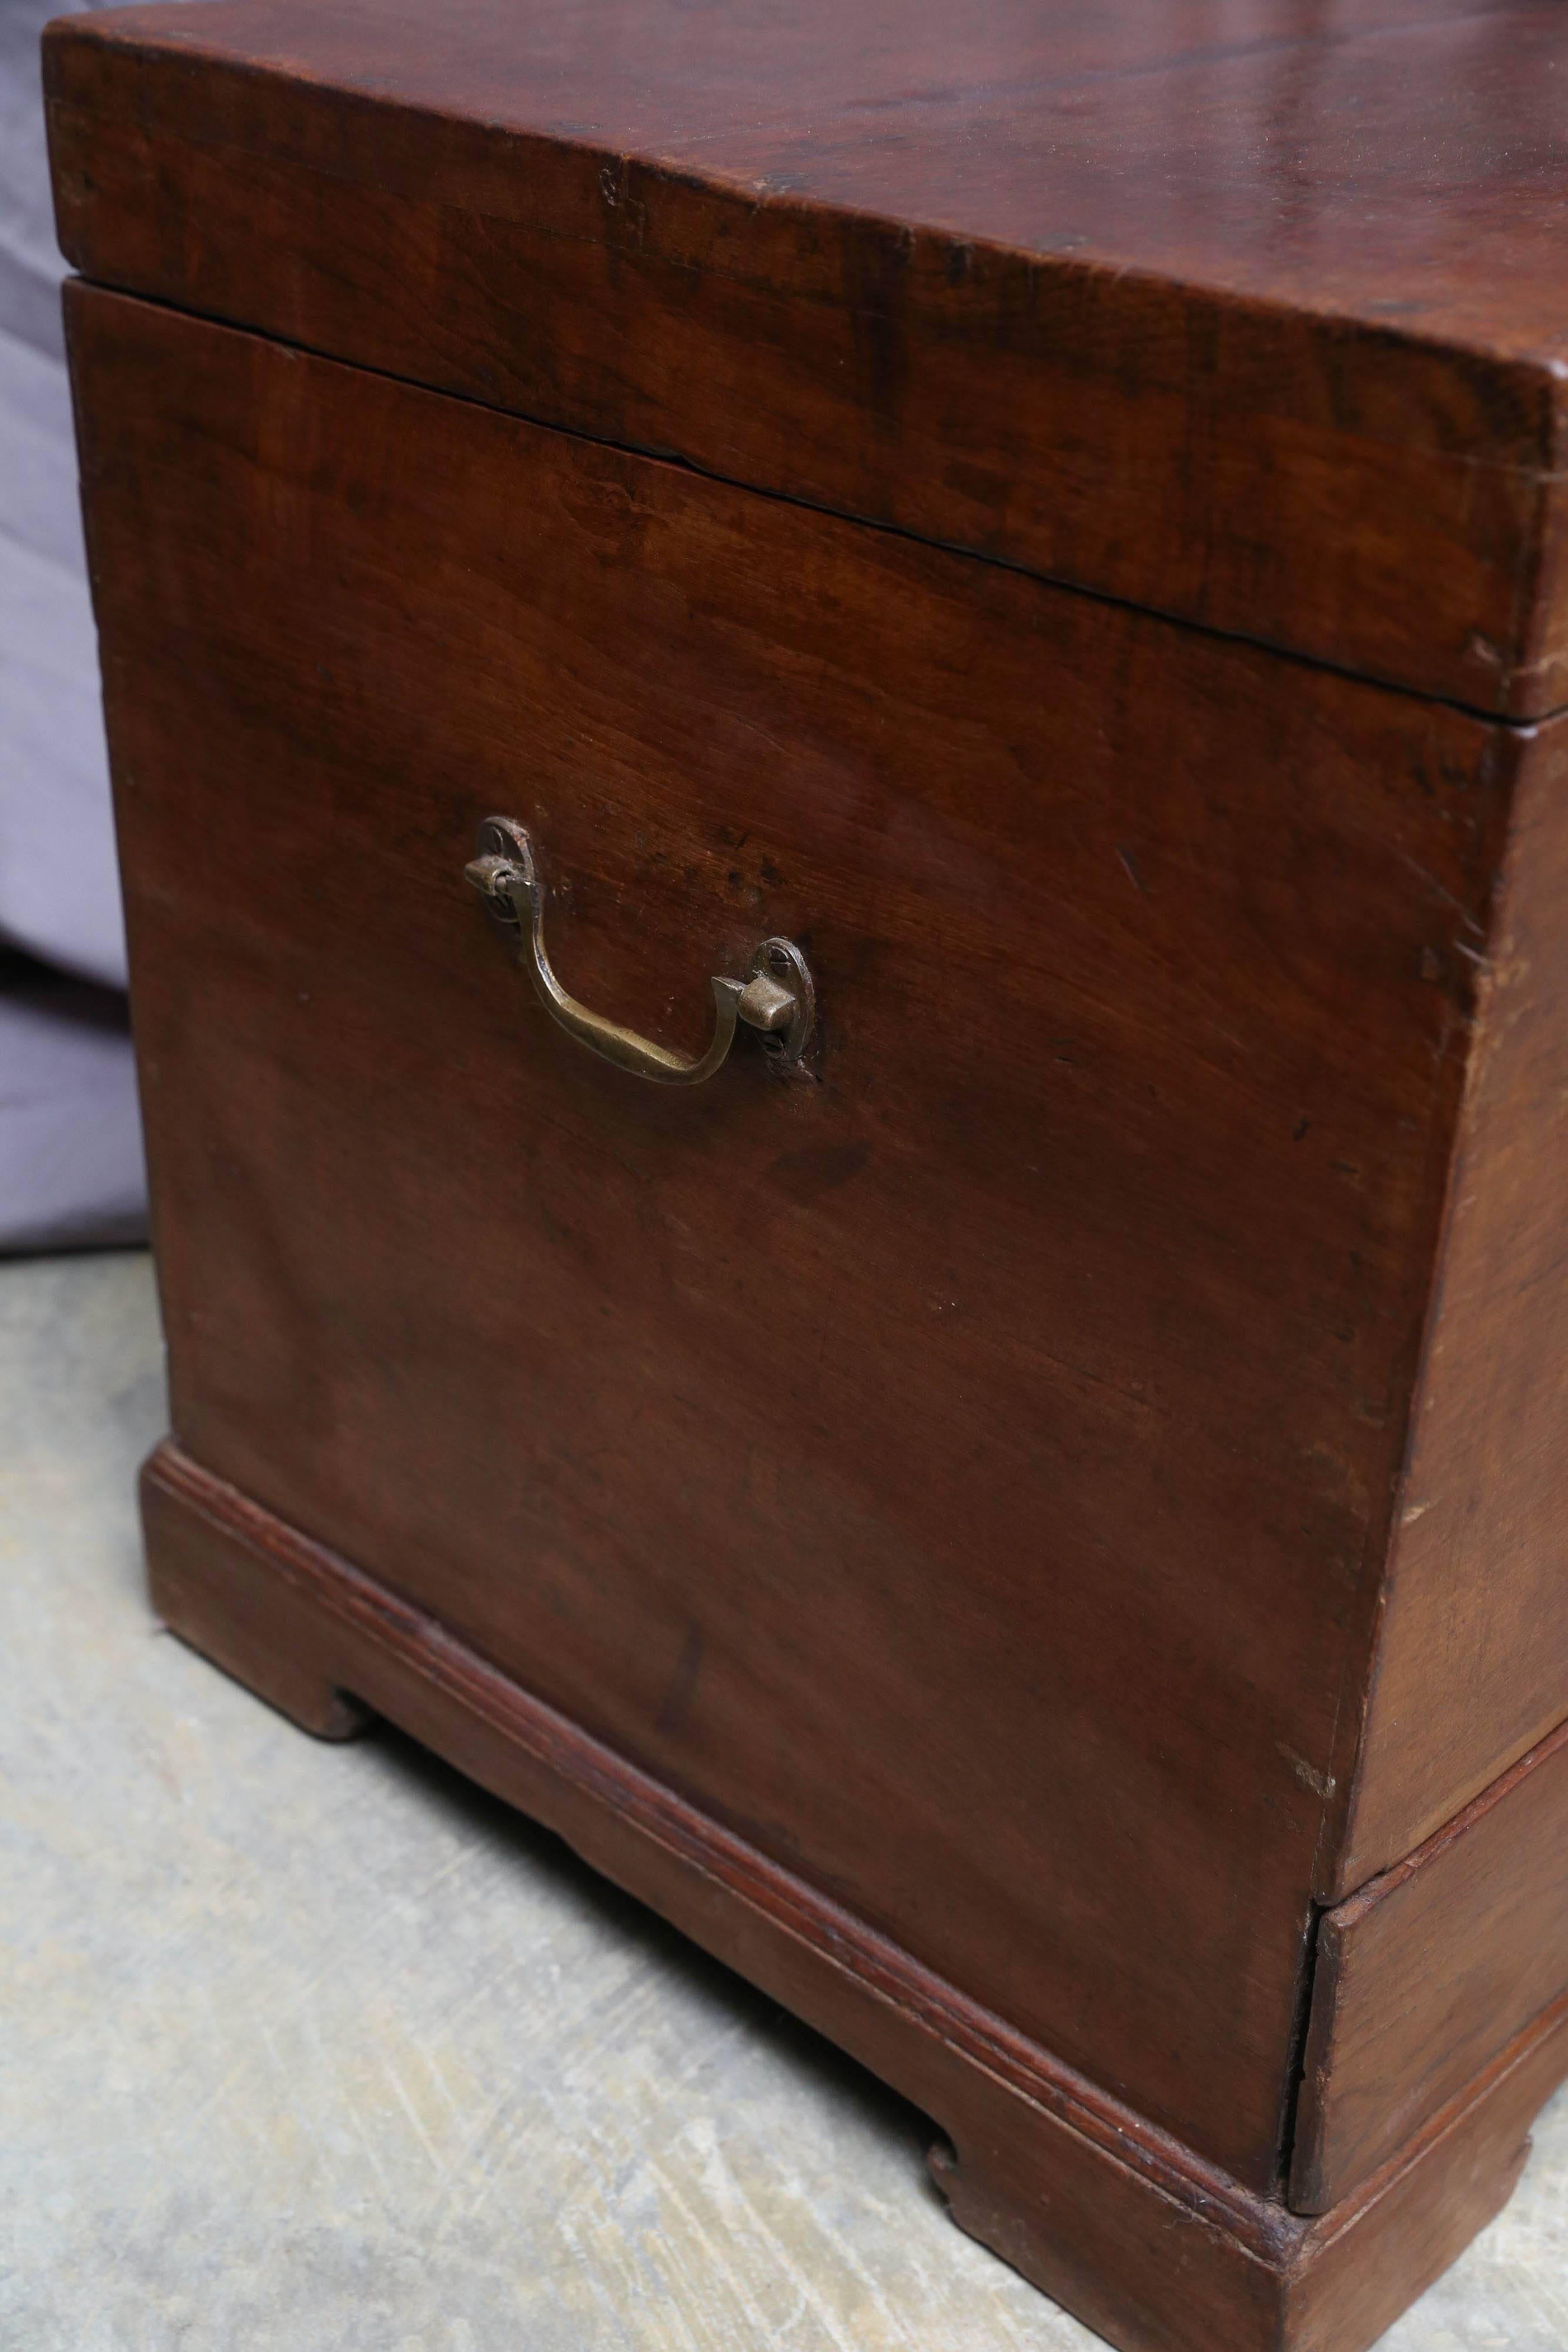 This custom-made teak wood box has two bottom drawers to keep jewelries and documents. It is made using handmade mortise and tenon joints. Primarily used for storing clothes and essentials like pocket watches etc. It retains all original solid